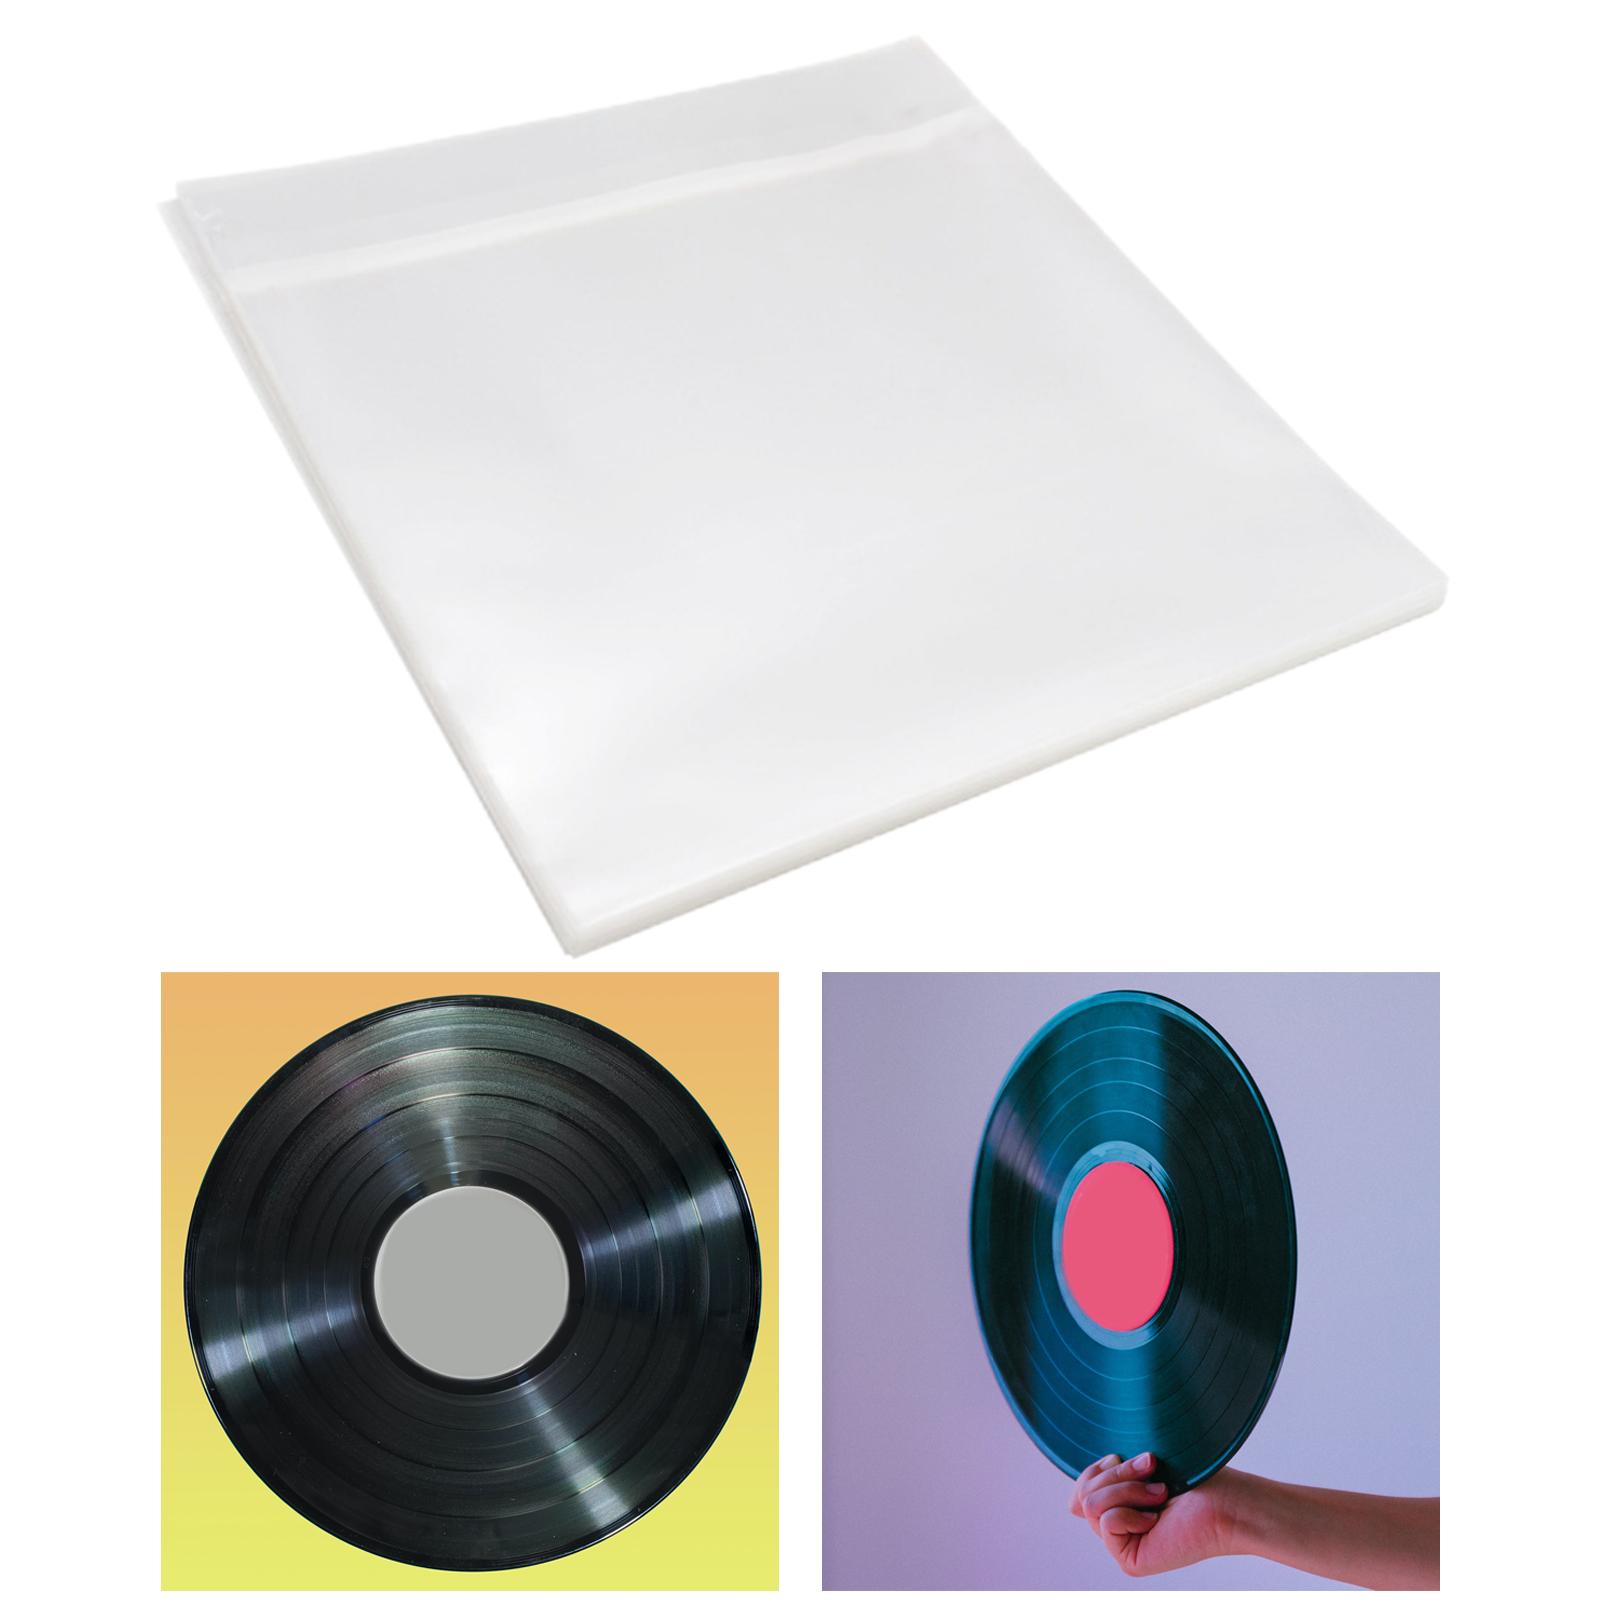 50Pcs Vinyl Record Sleeves Records Bag Reusable Clear for Turntable Player 12inch Dual Record